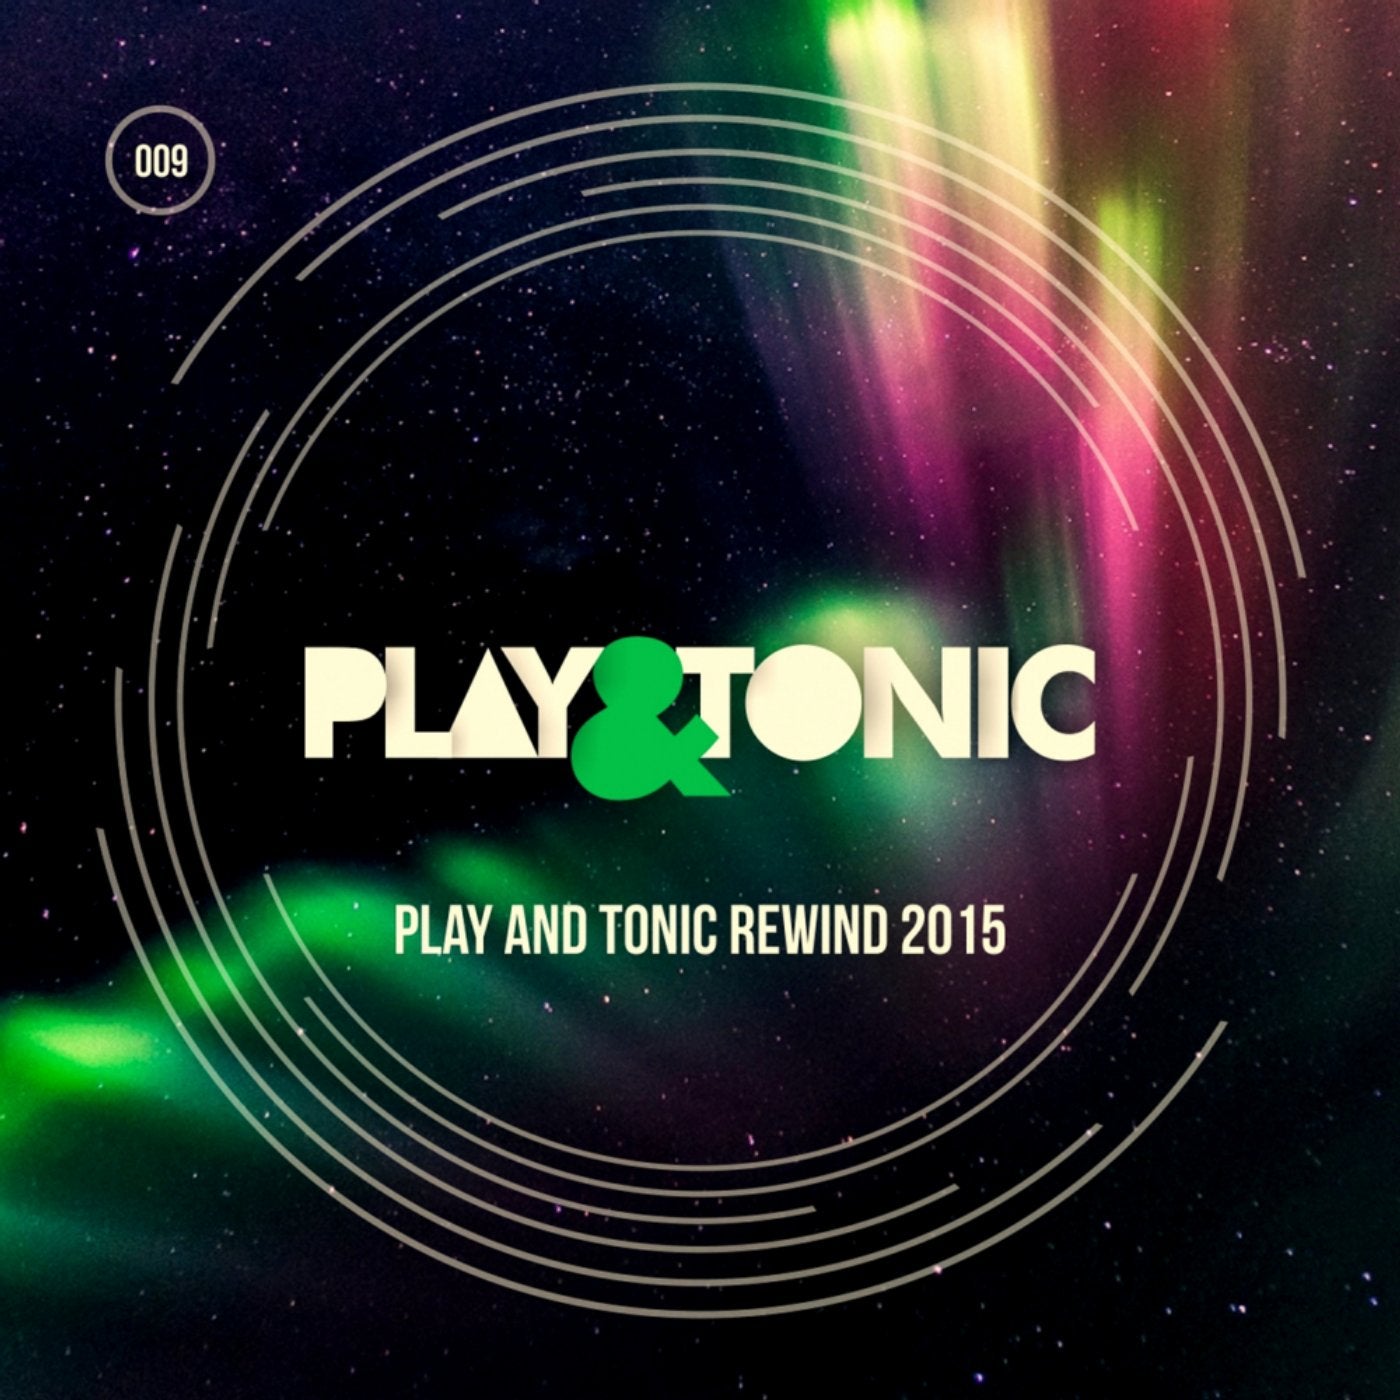 Play And Tonic Rewind 2015